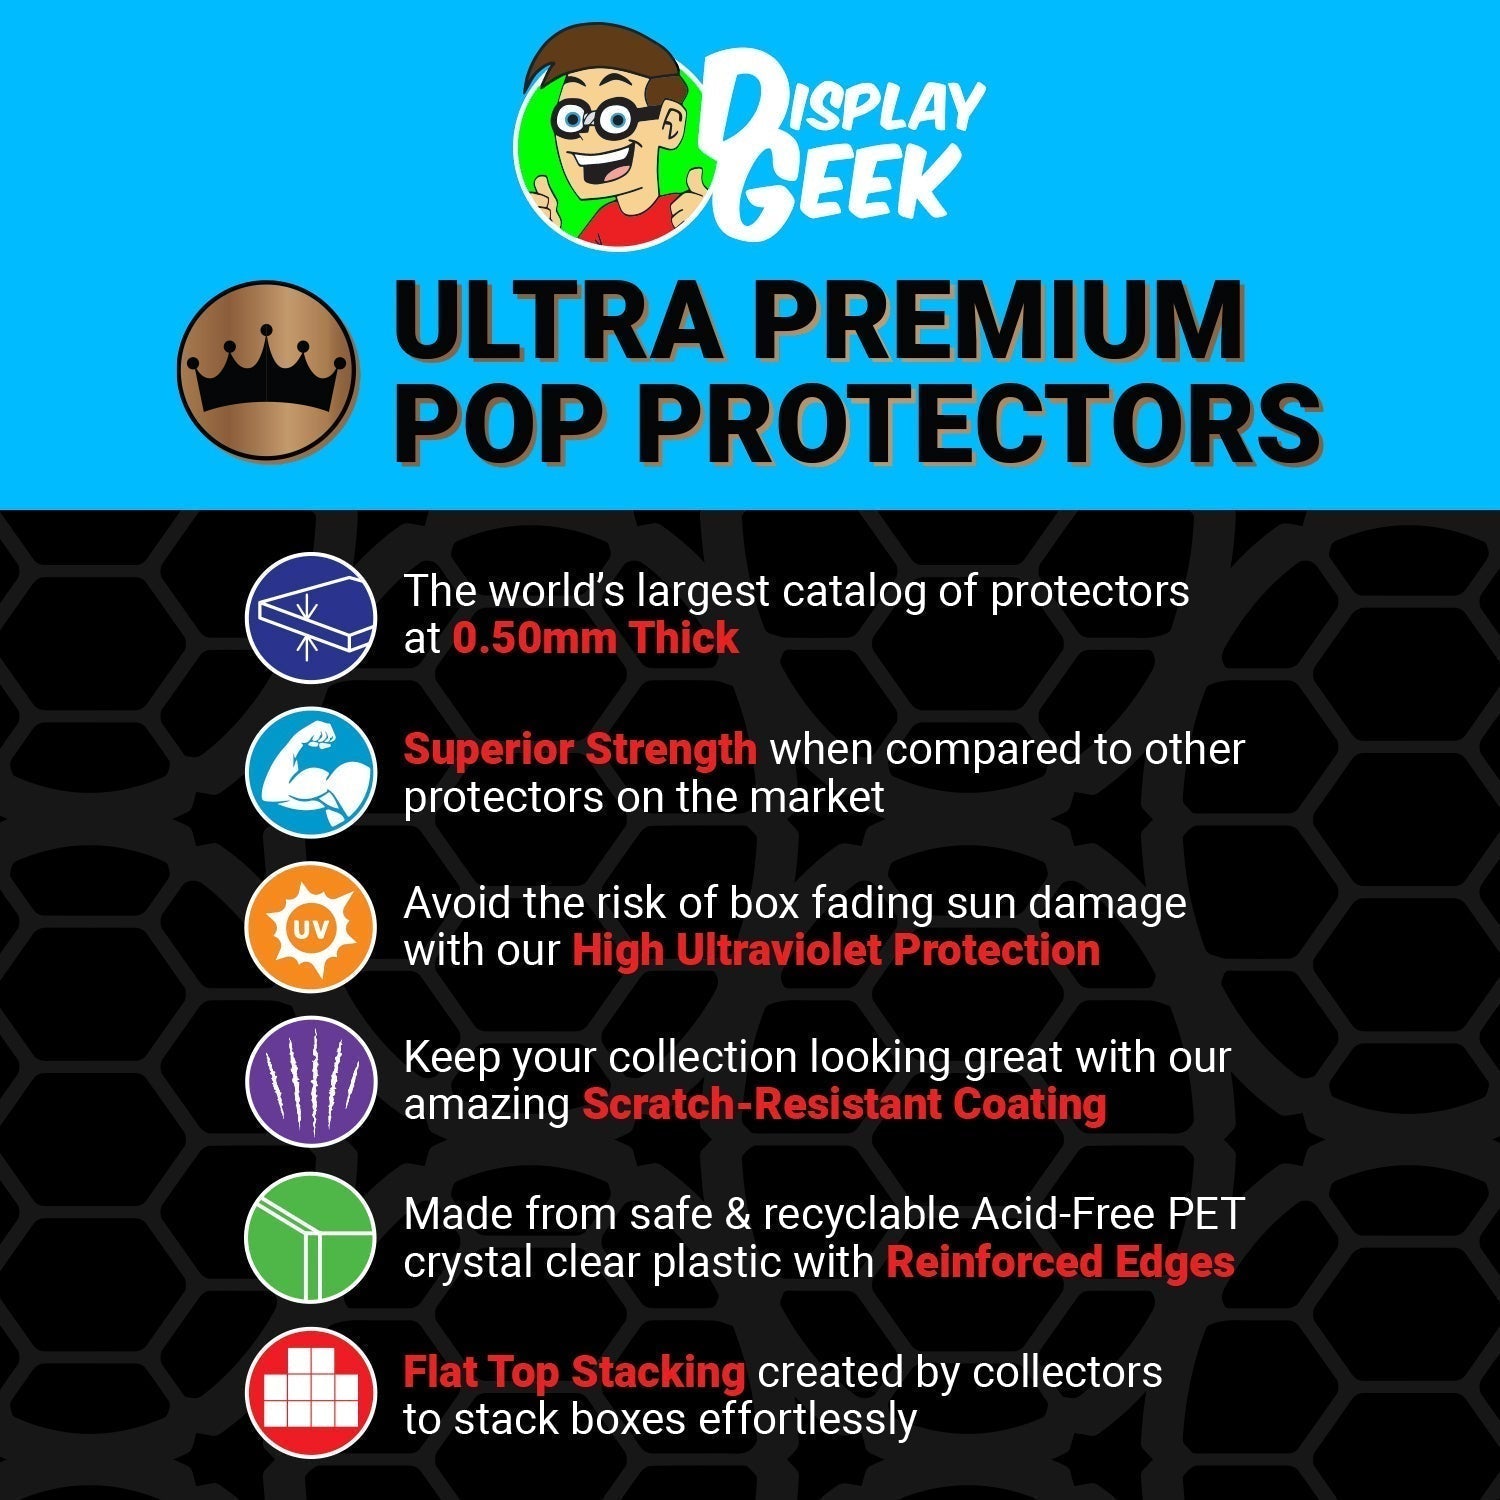 Pop Protector for 3 Pack Drogon, Rhaegal & Viserion Funko Pop - PPG Pop Protector Guide Search Created by Display Geek